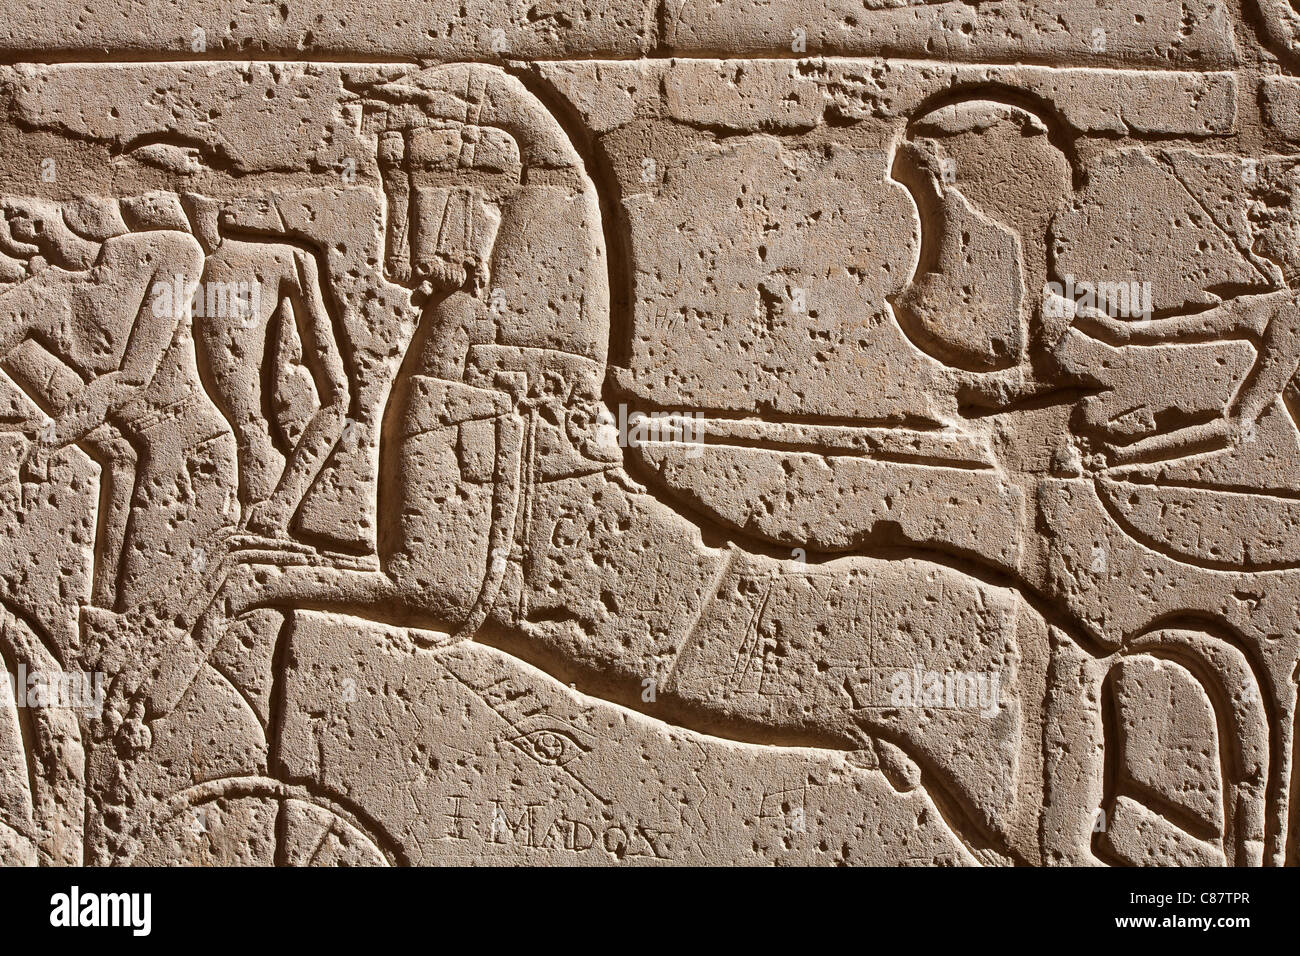 Relief work showing chariot and horses in military campaigns of Ramesses II at the Ramesseum, Luxor Egypt Stock Photo